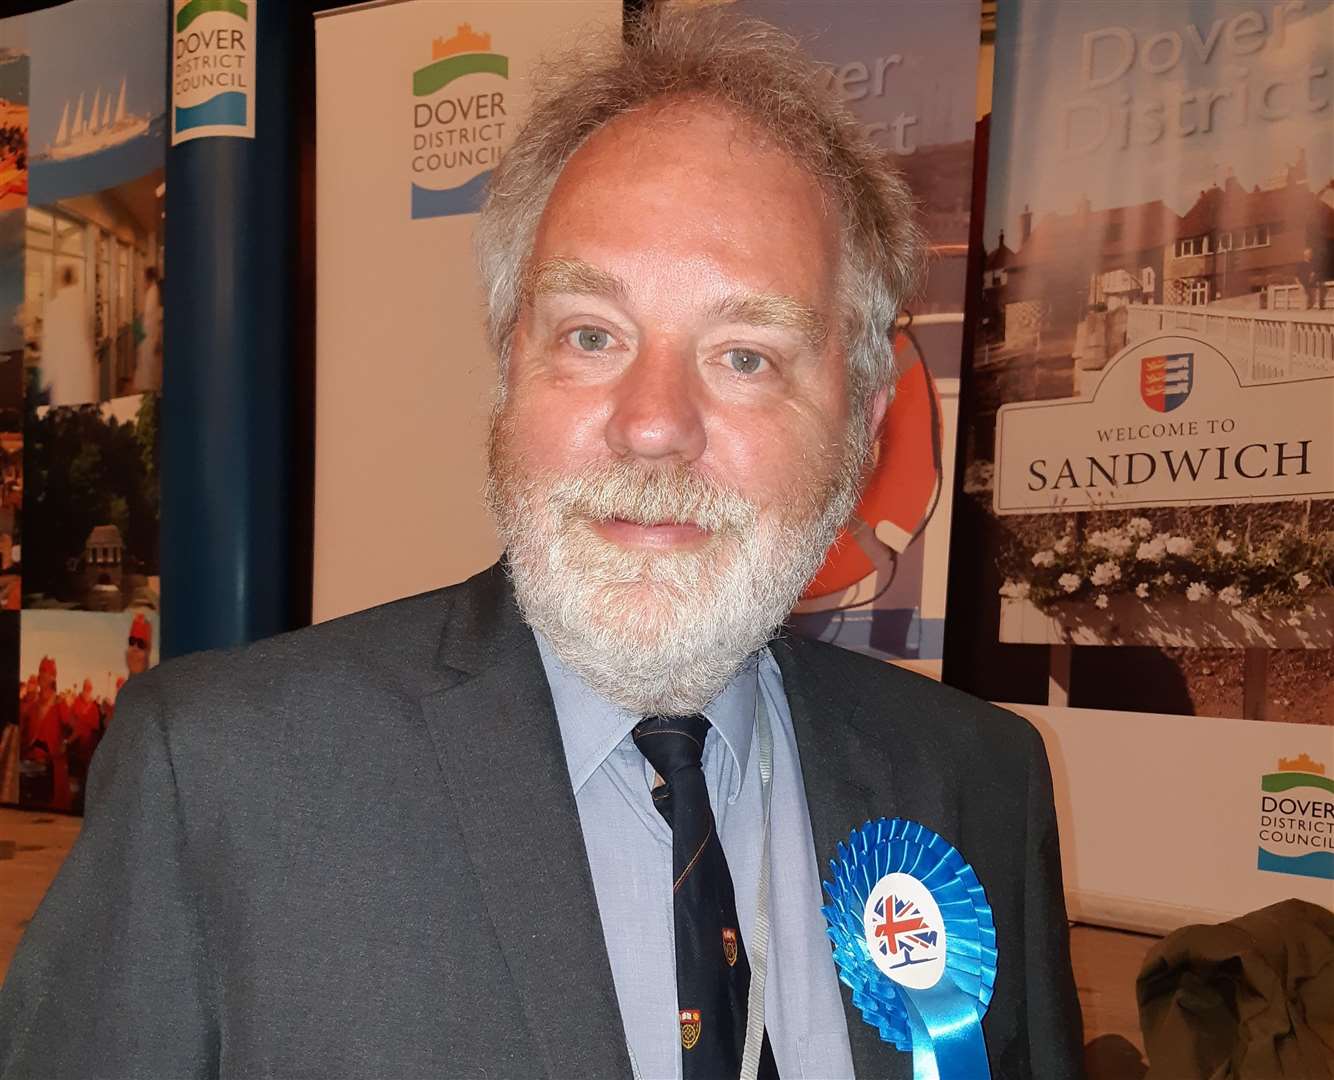 Peter Jull (Con) gained a seat in North Deal